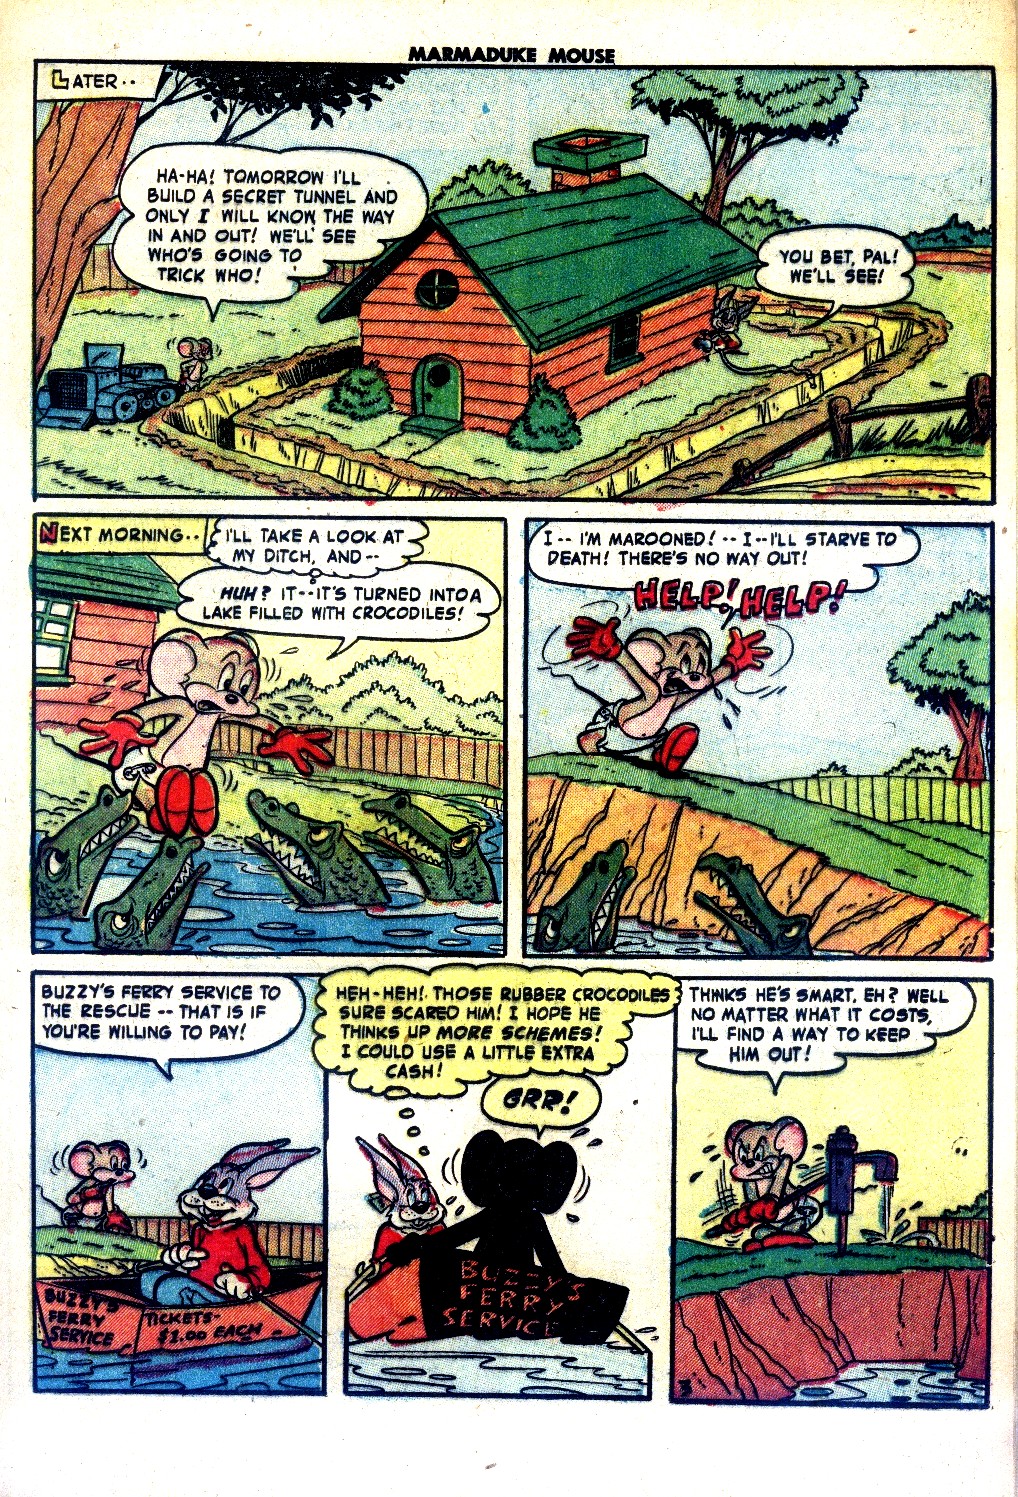 Read online Marmaduke Mouse comic -  Issue #40 - 21